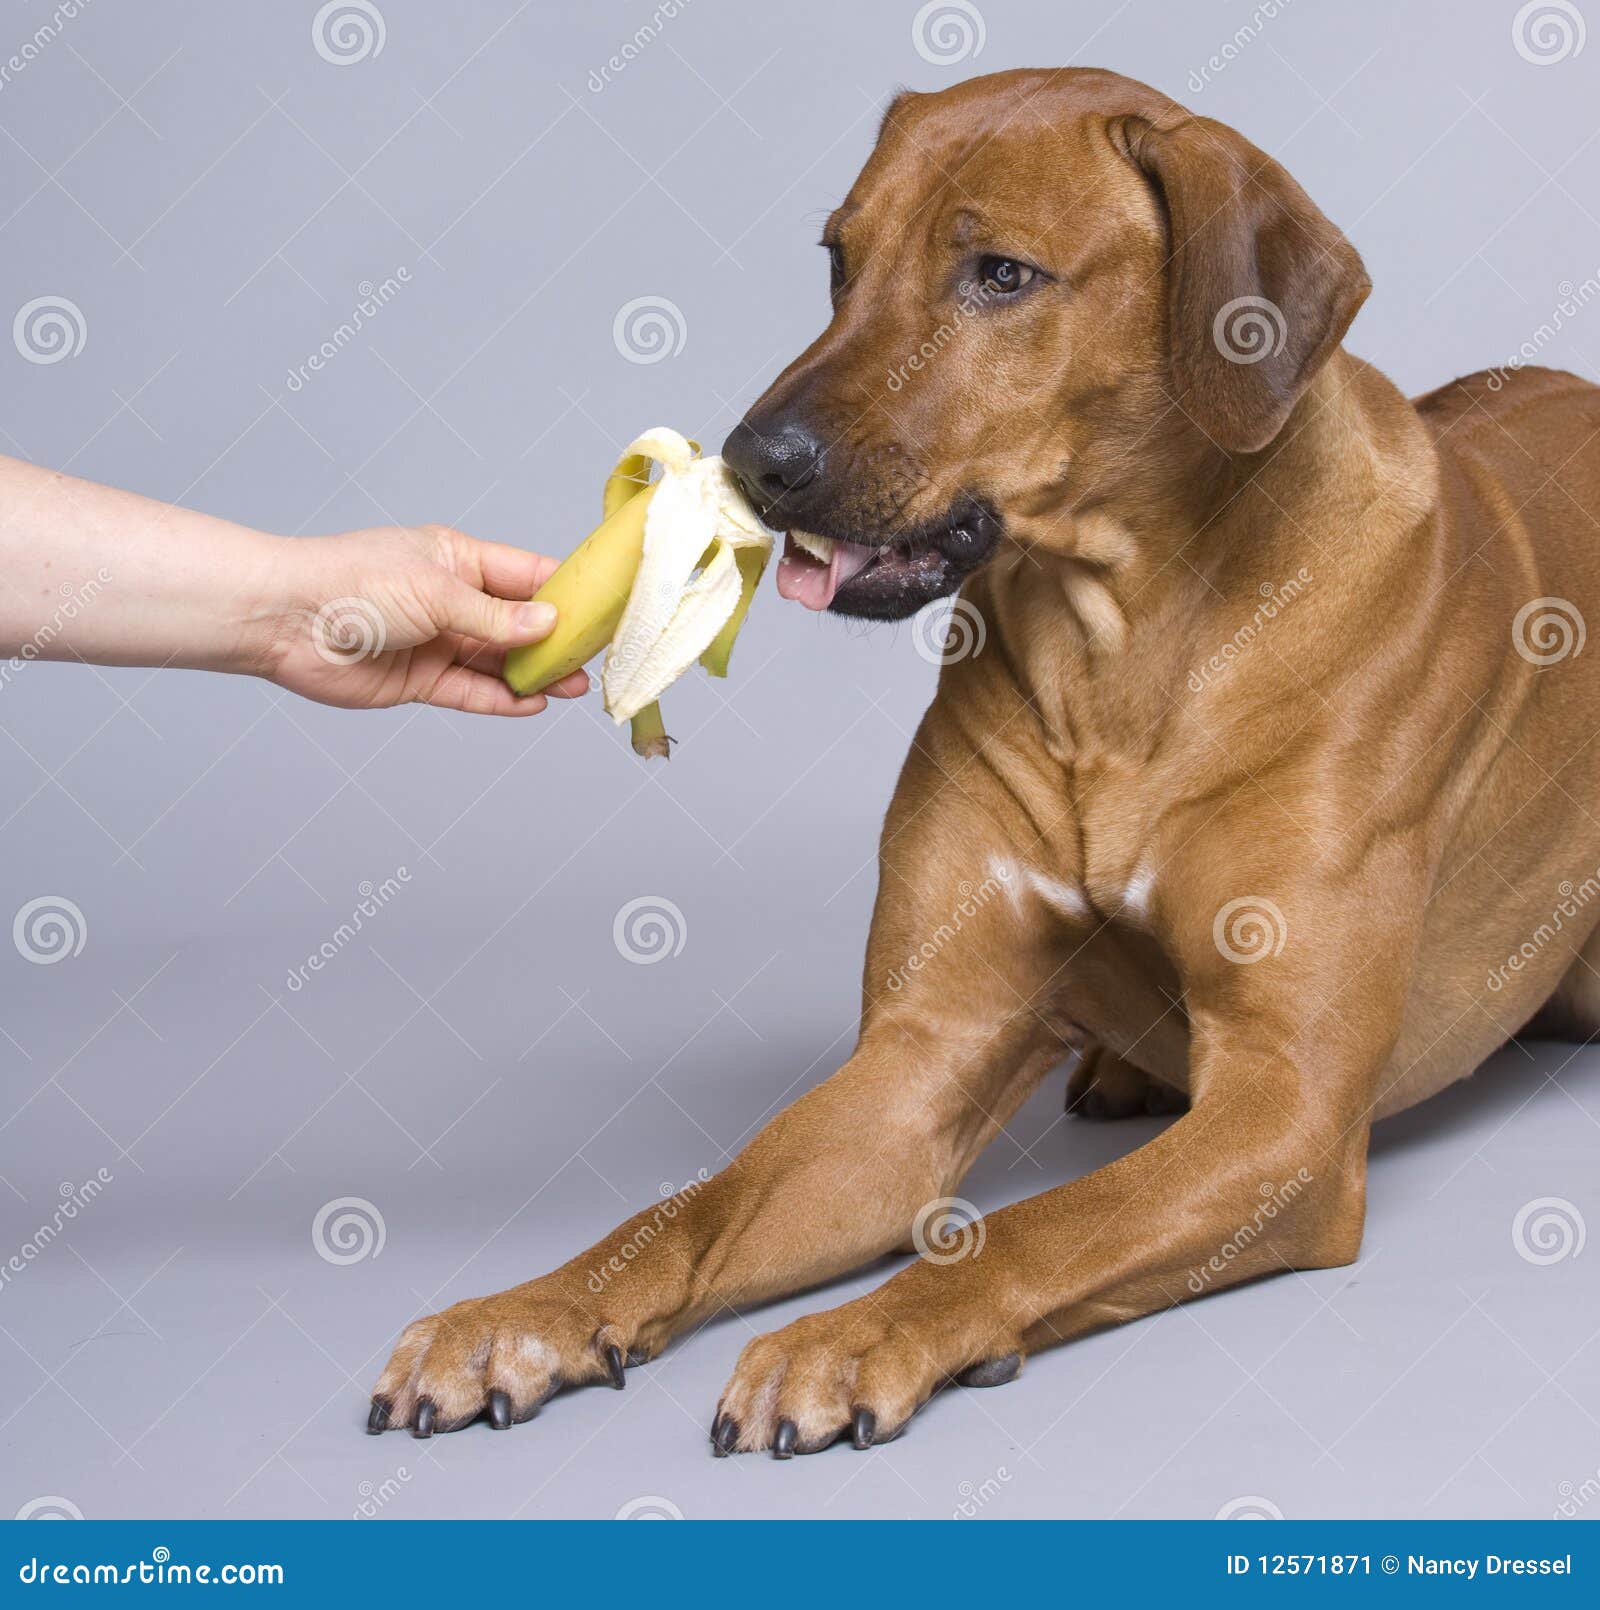 Dog eating healthy food stock image. Image of breed ...